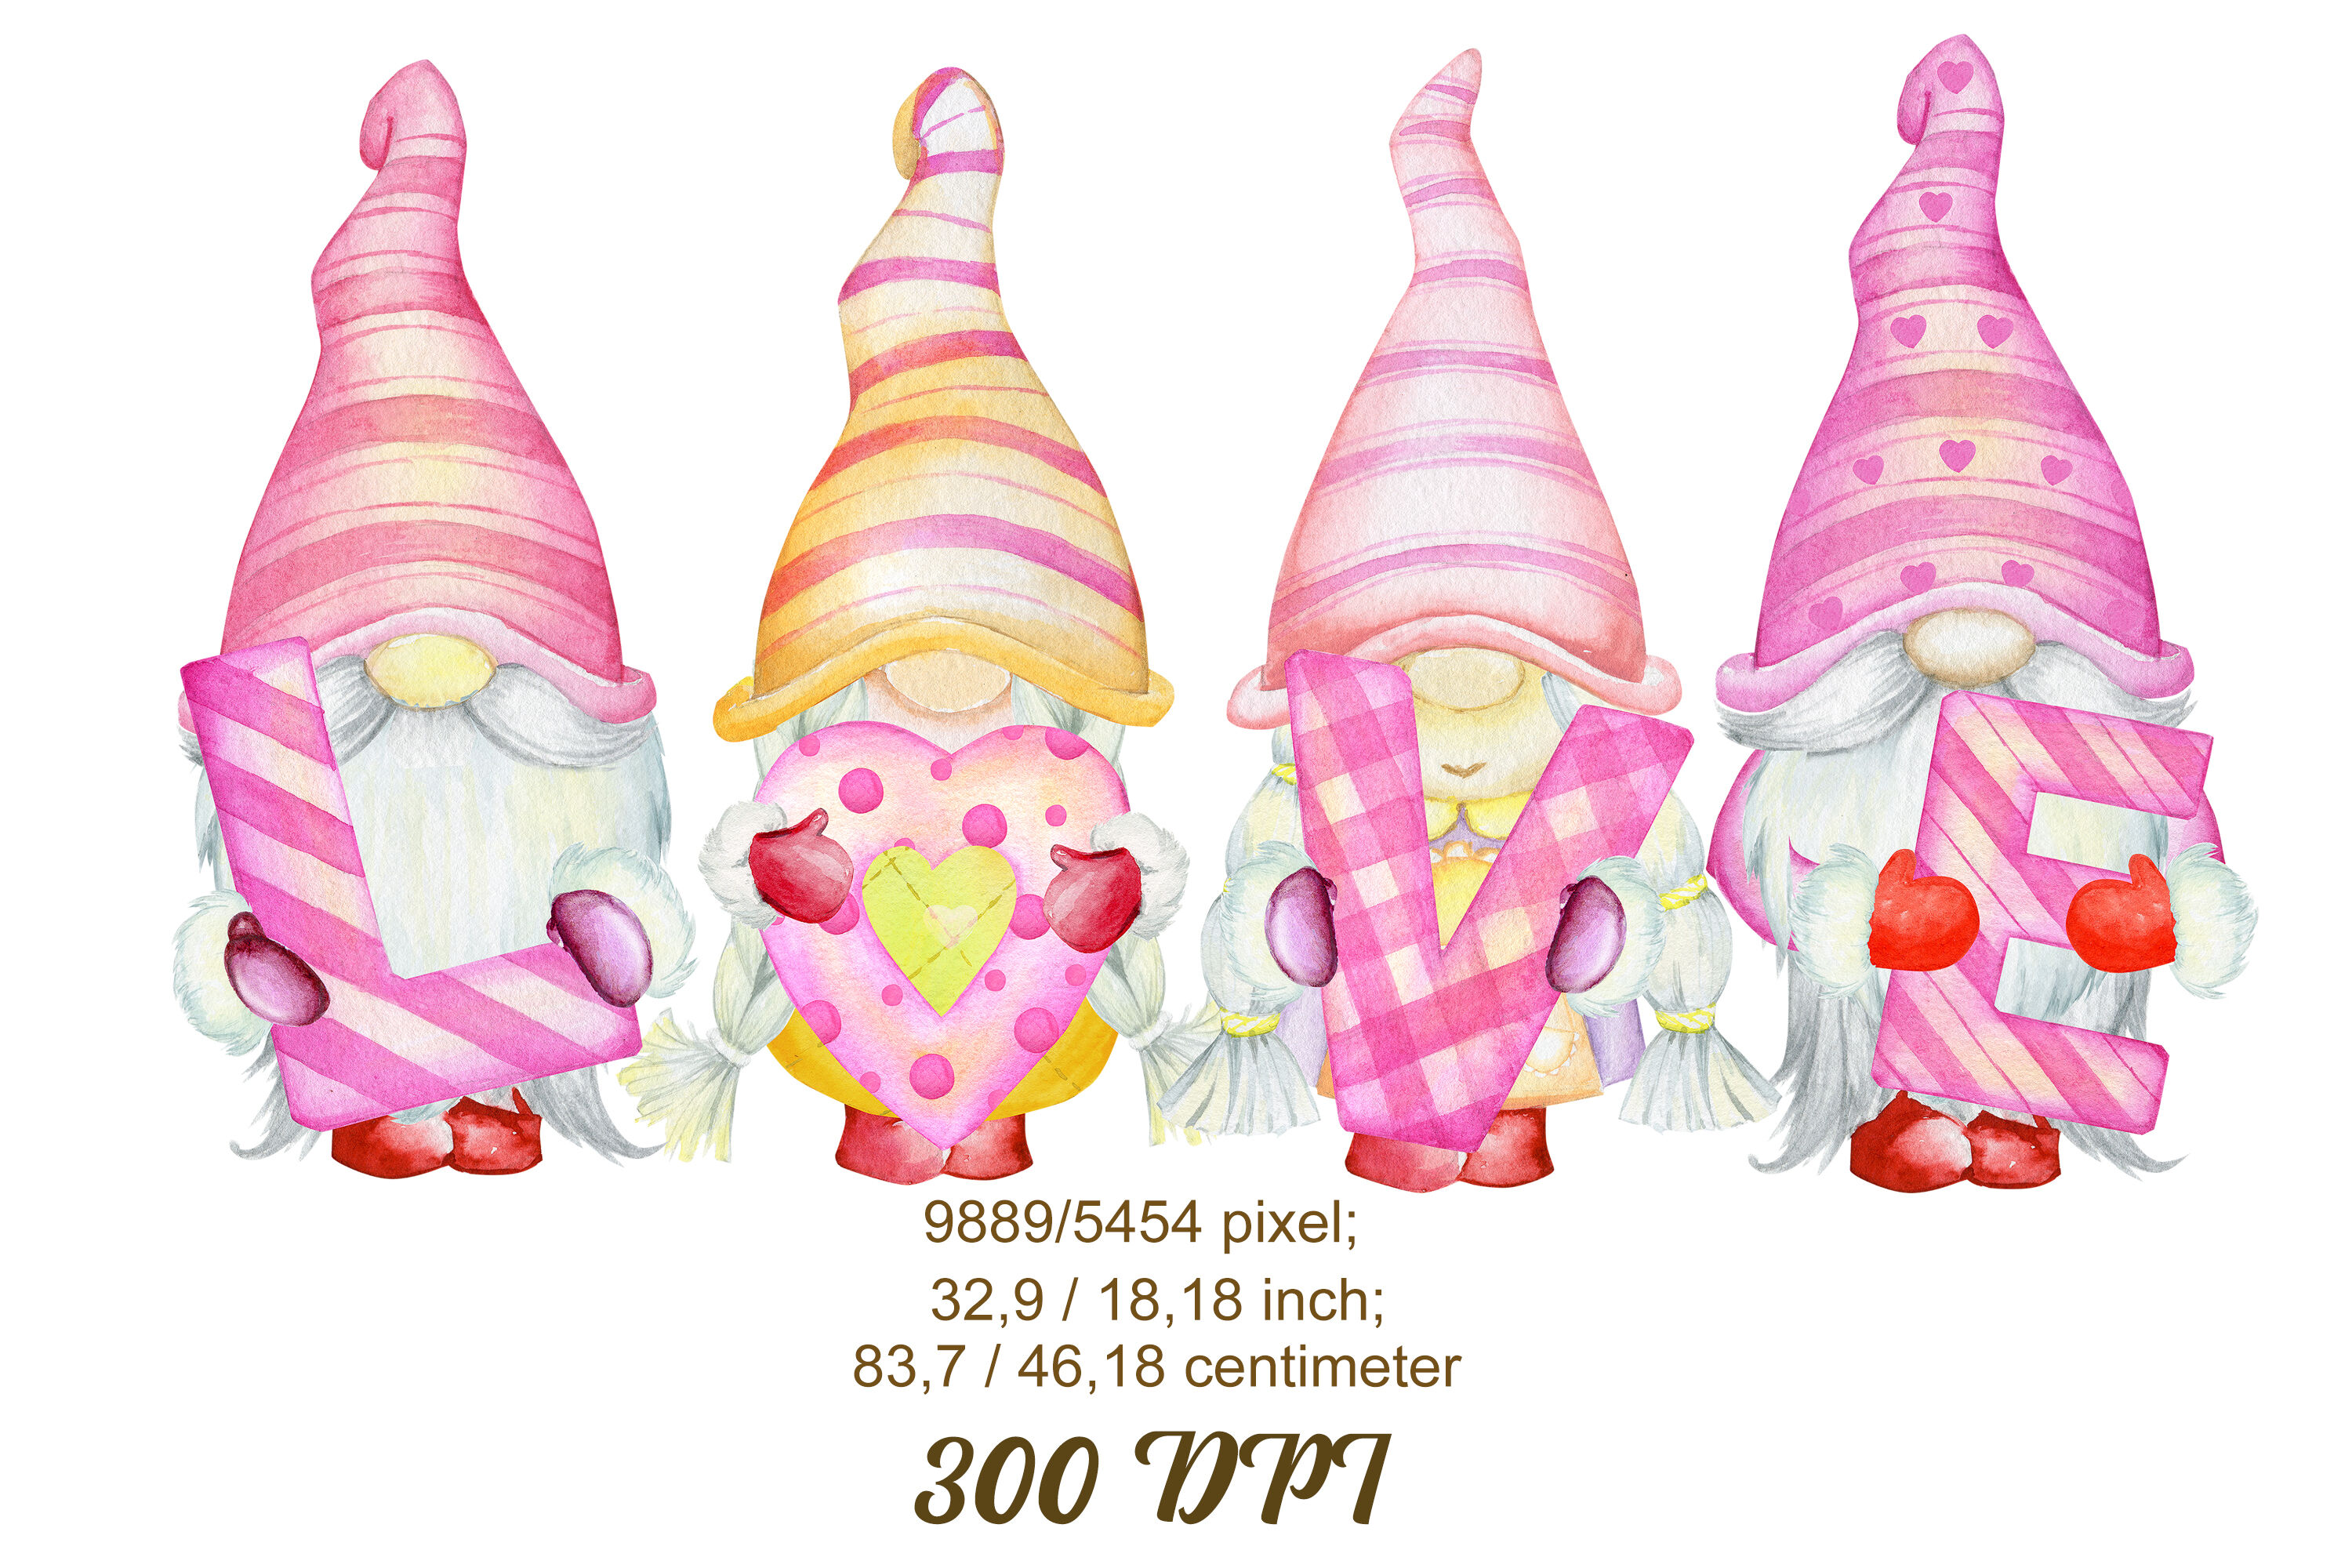 Download Watercolor Clip Art Valentine S Day Valentine Gnome Clipart Valent By Nlia2020 Thehungryjpeg Com